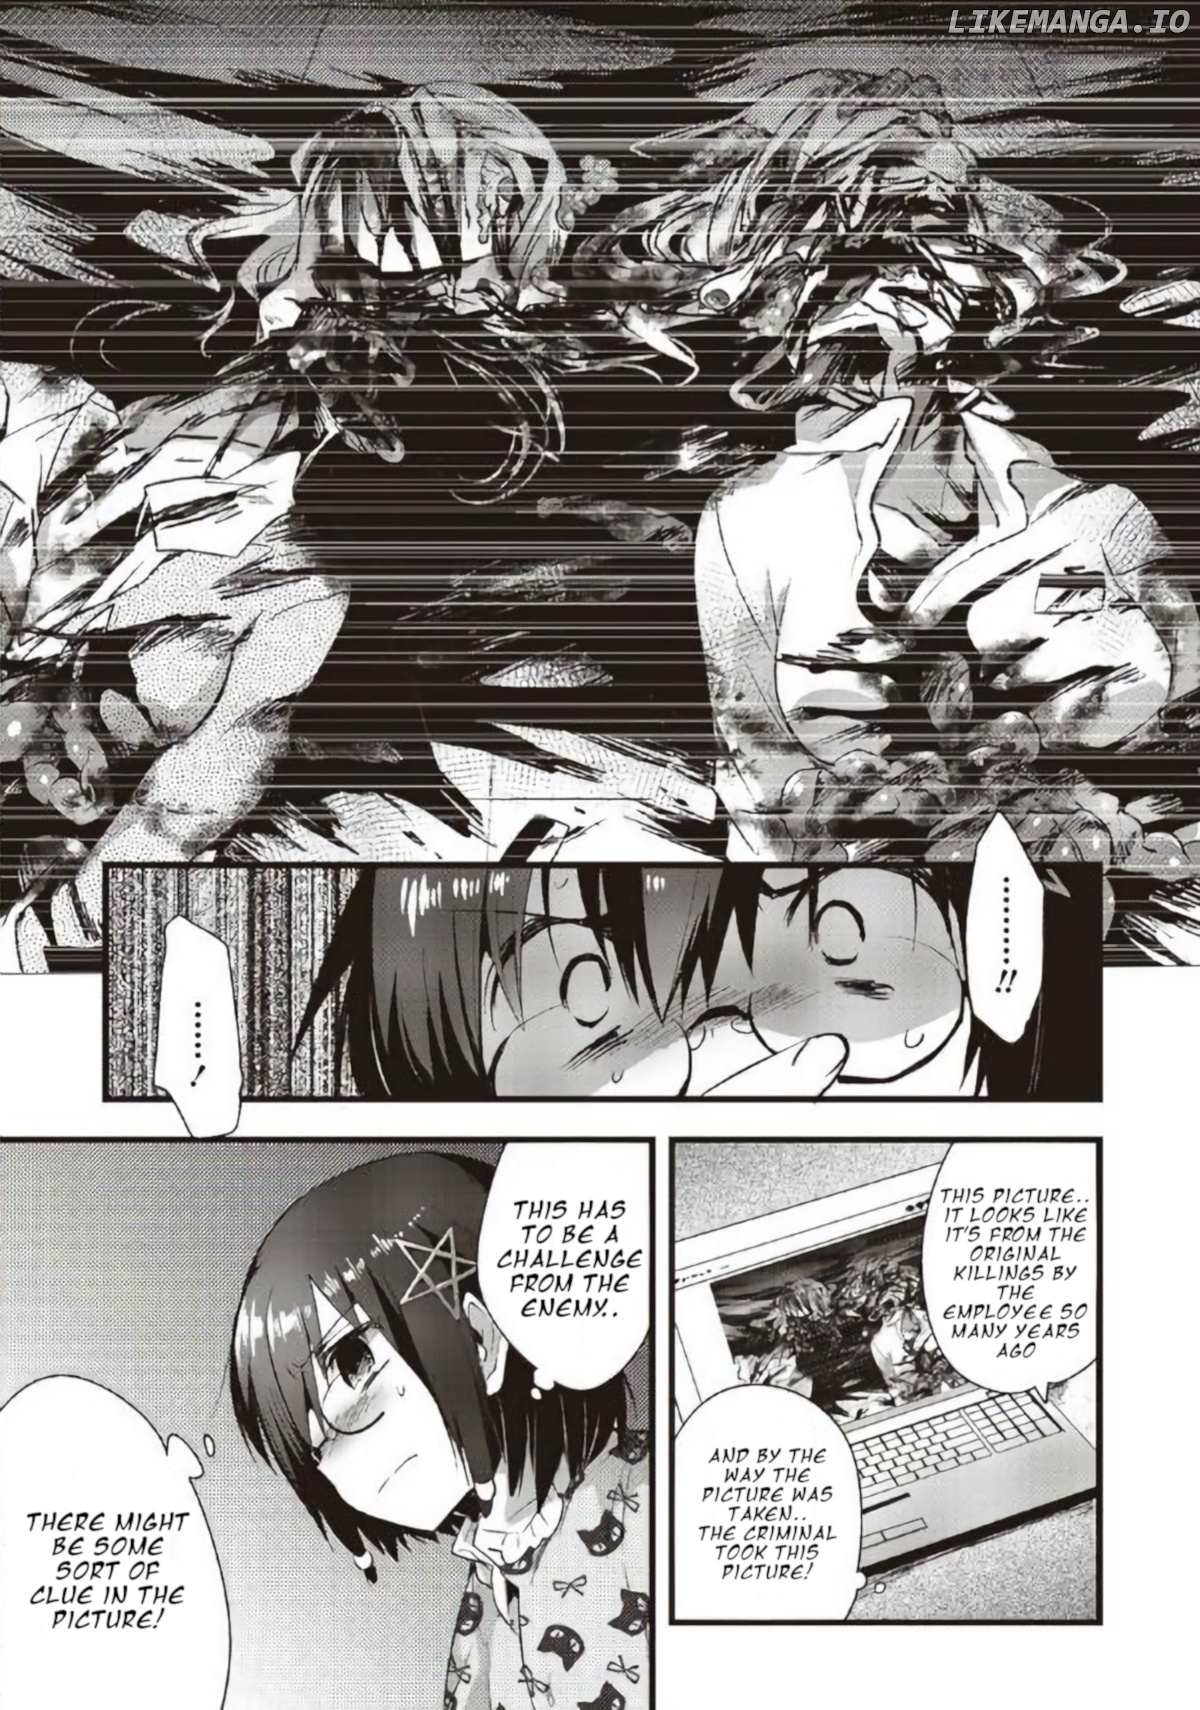 Corpse Party Cemetery 0 - Kaibyaku no Ars Moriendi chapter 12 - page 10